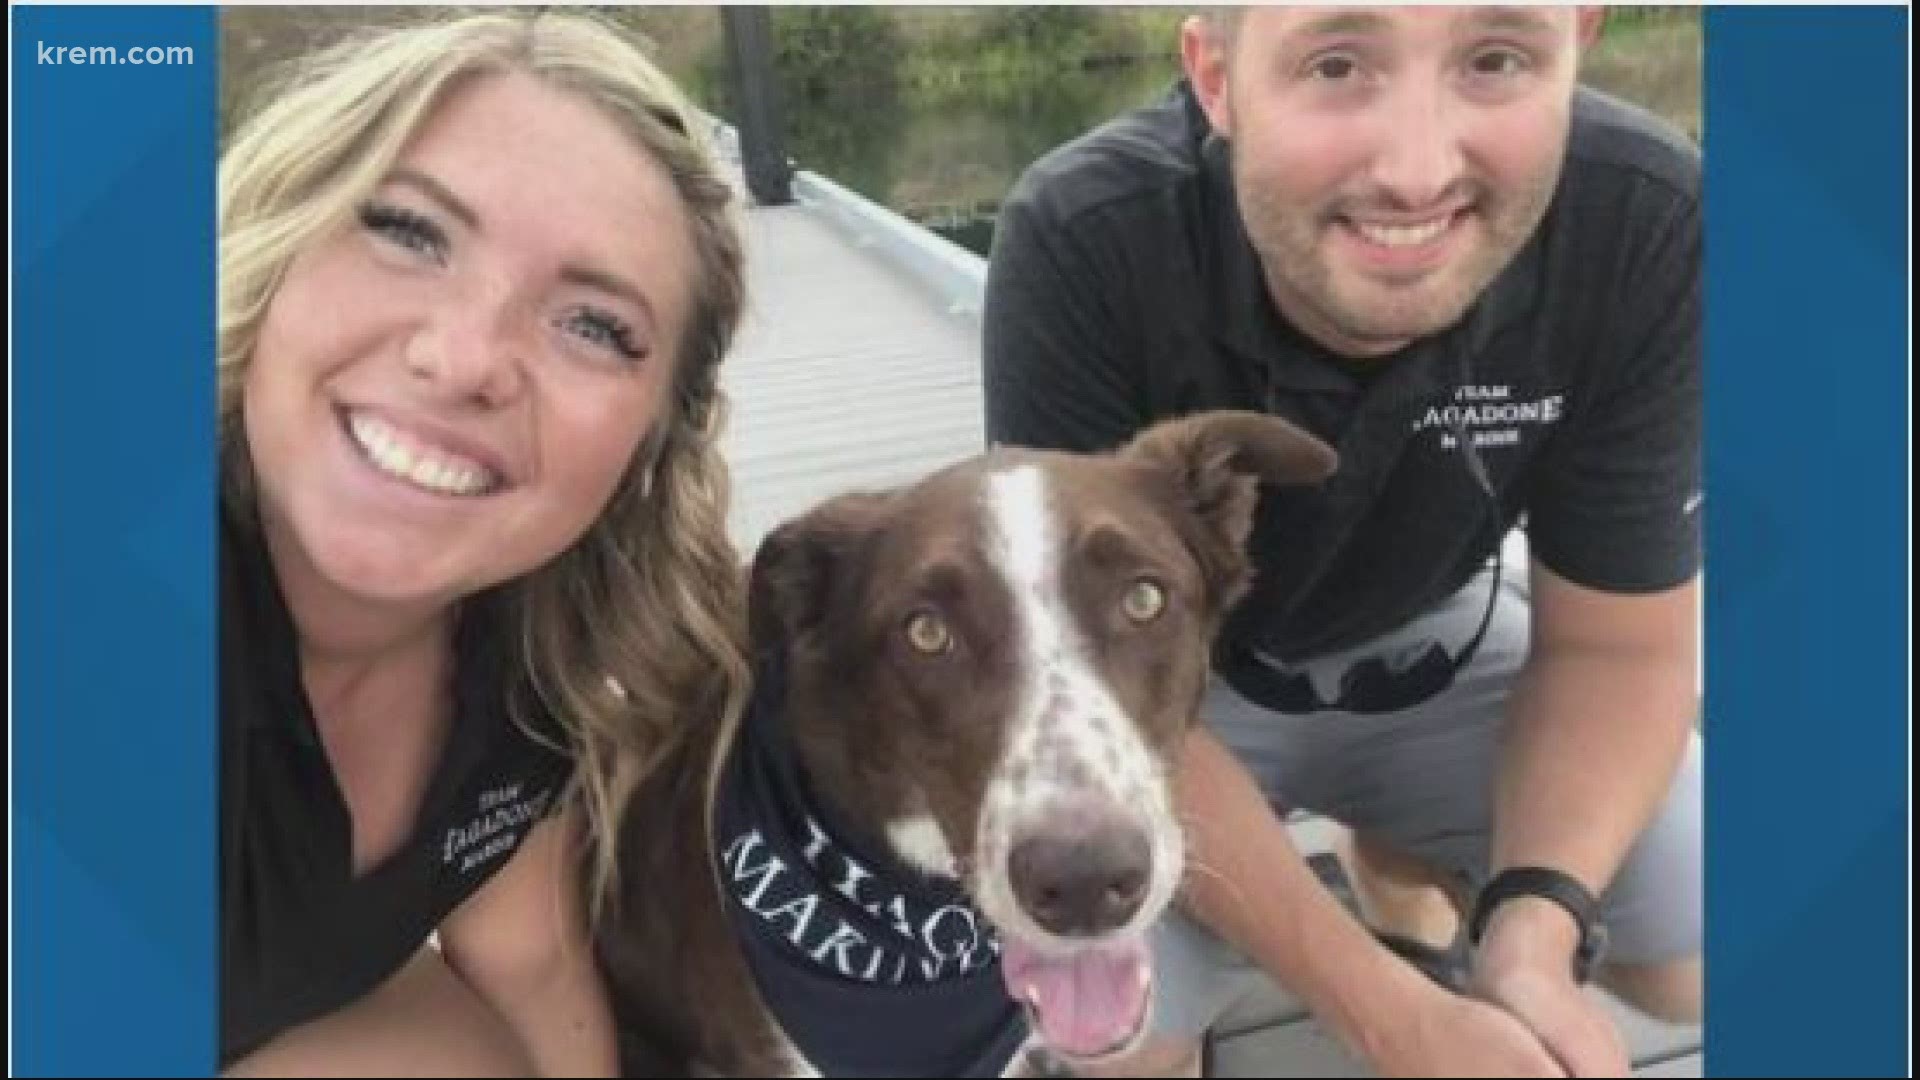 Owners Christian and Jade Harlocker were at a barbecue about a mile away from their Hayden home when they received a sound alert from their outdoor security camera.